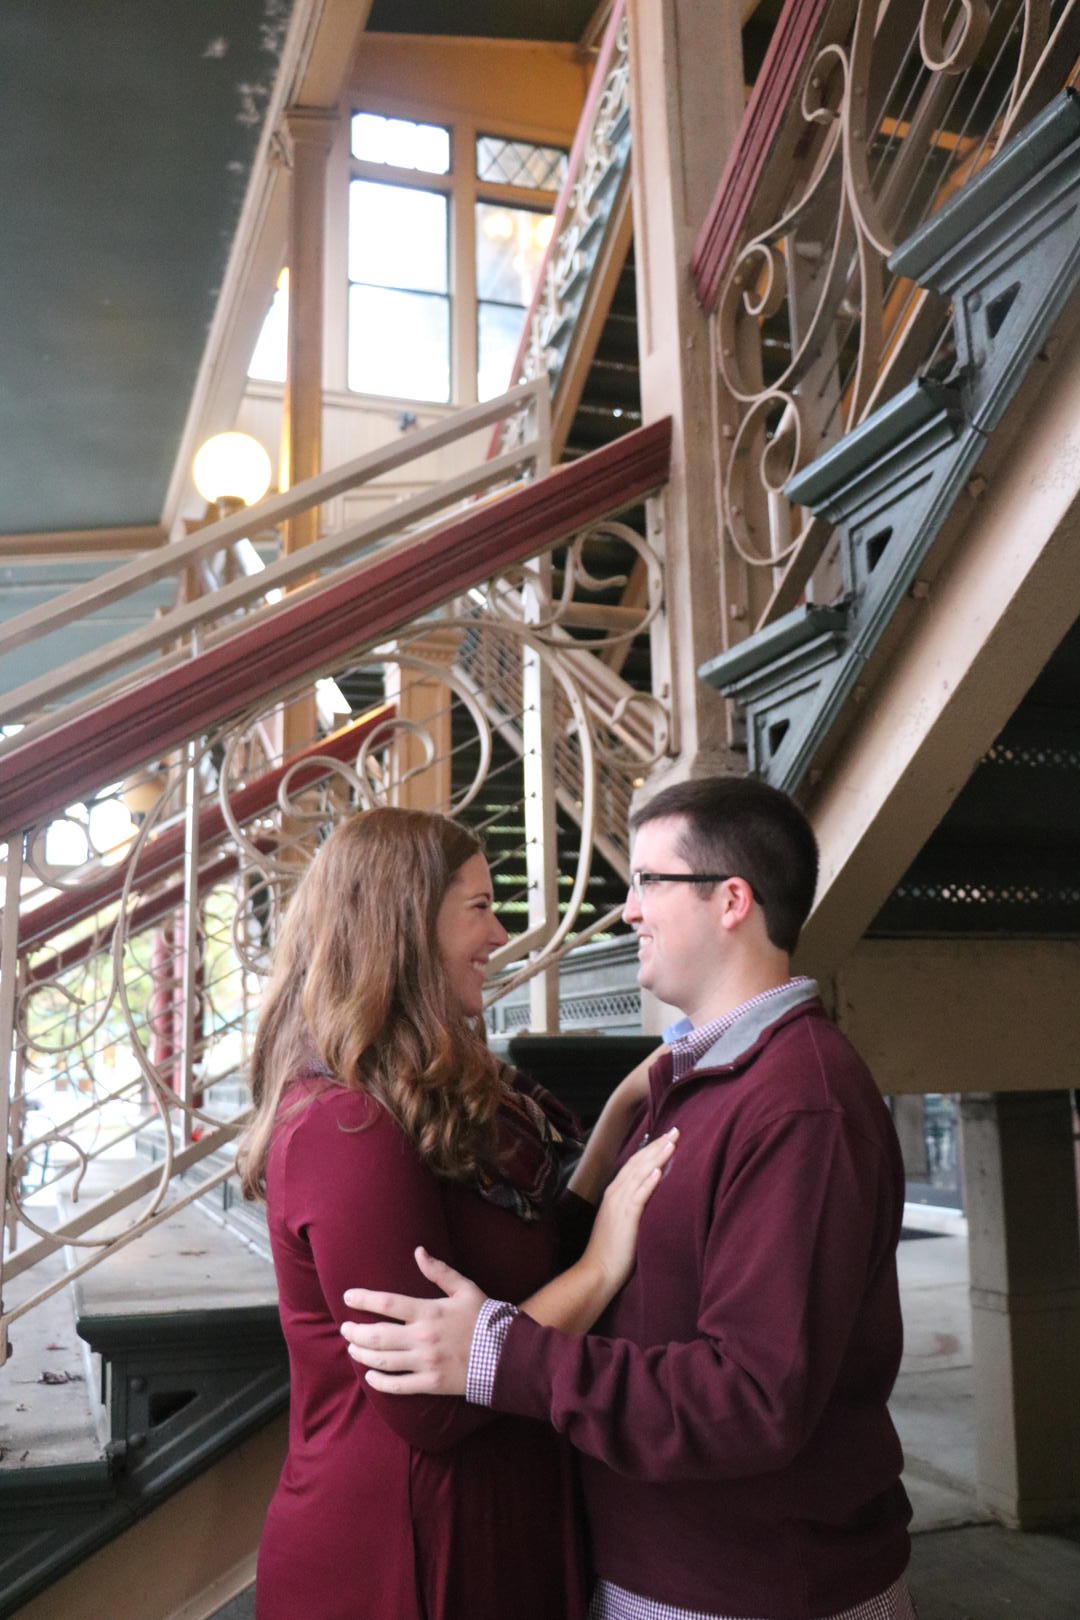 Haleigh and Sean looking into each other's eyes in front of a flight of ornate stairs
